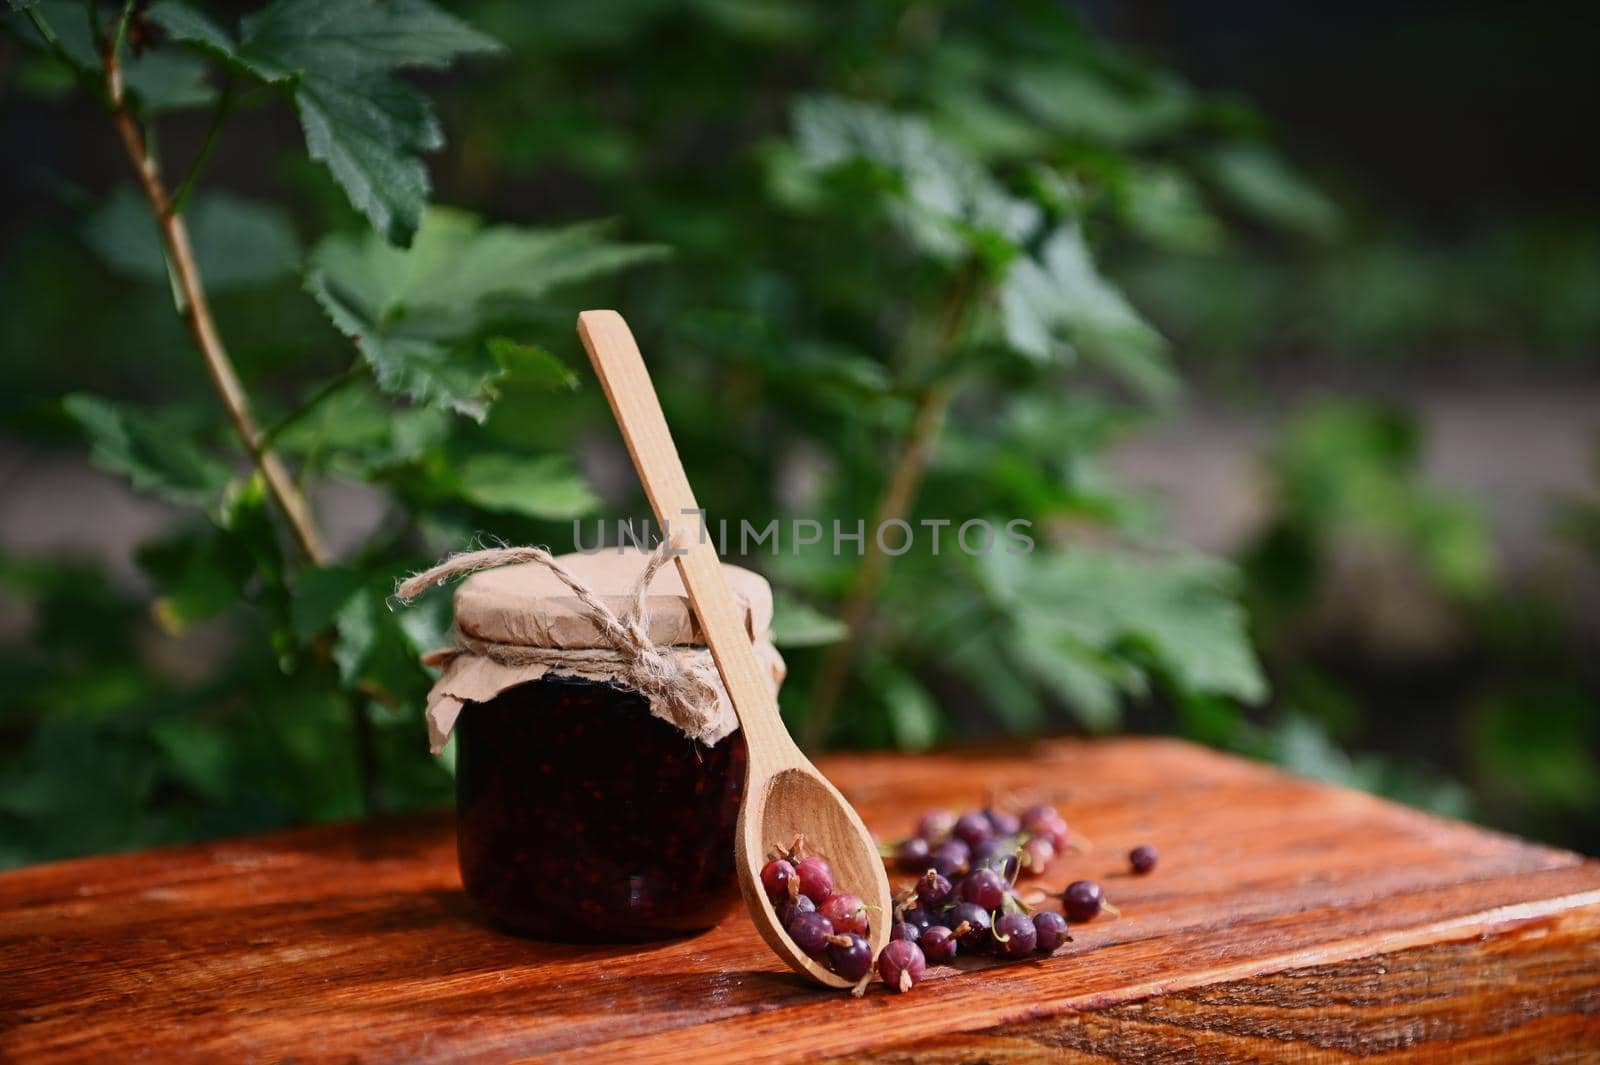 Still life composition of wooden tea spoon with gooseberries scattered on rustic bench, and a jar of homemade berry jam against a gooseberry bush background in the rural organic farm. Canning concept